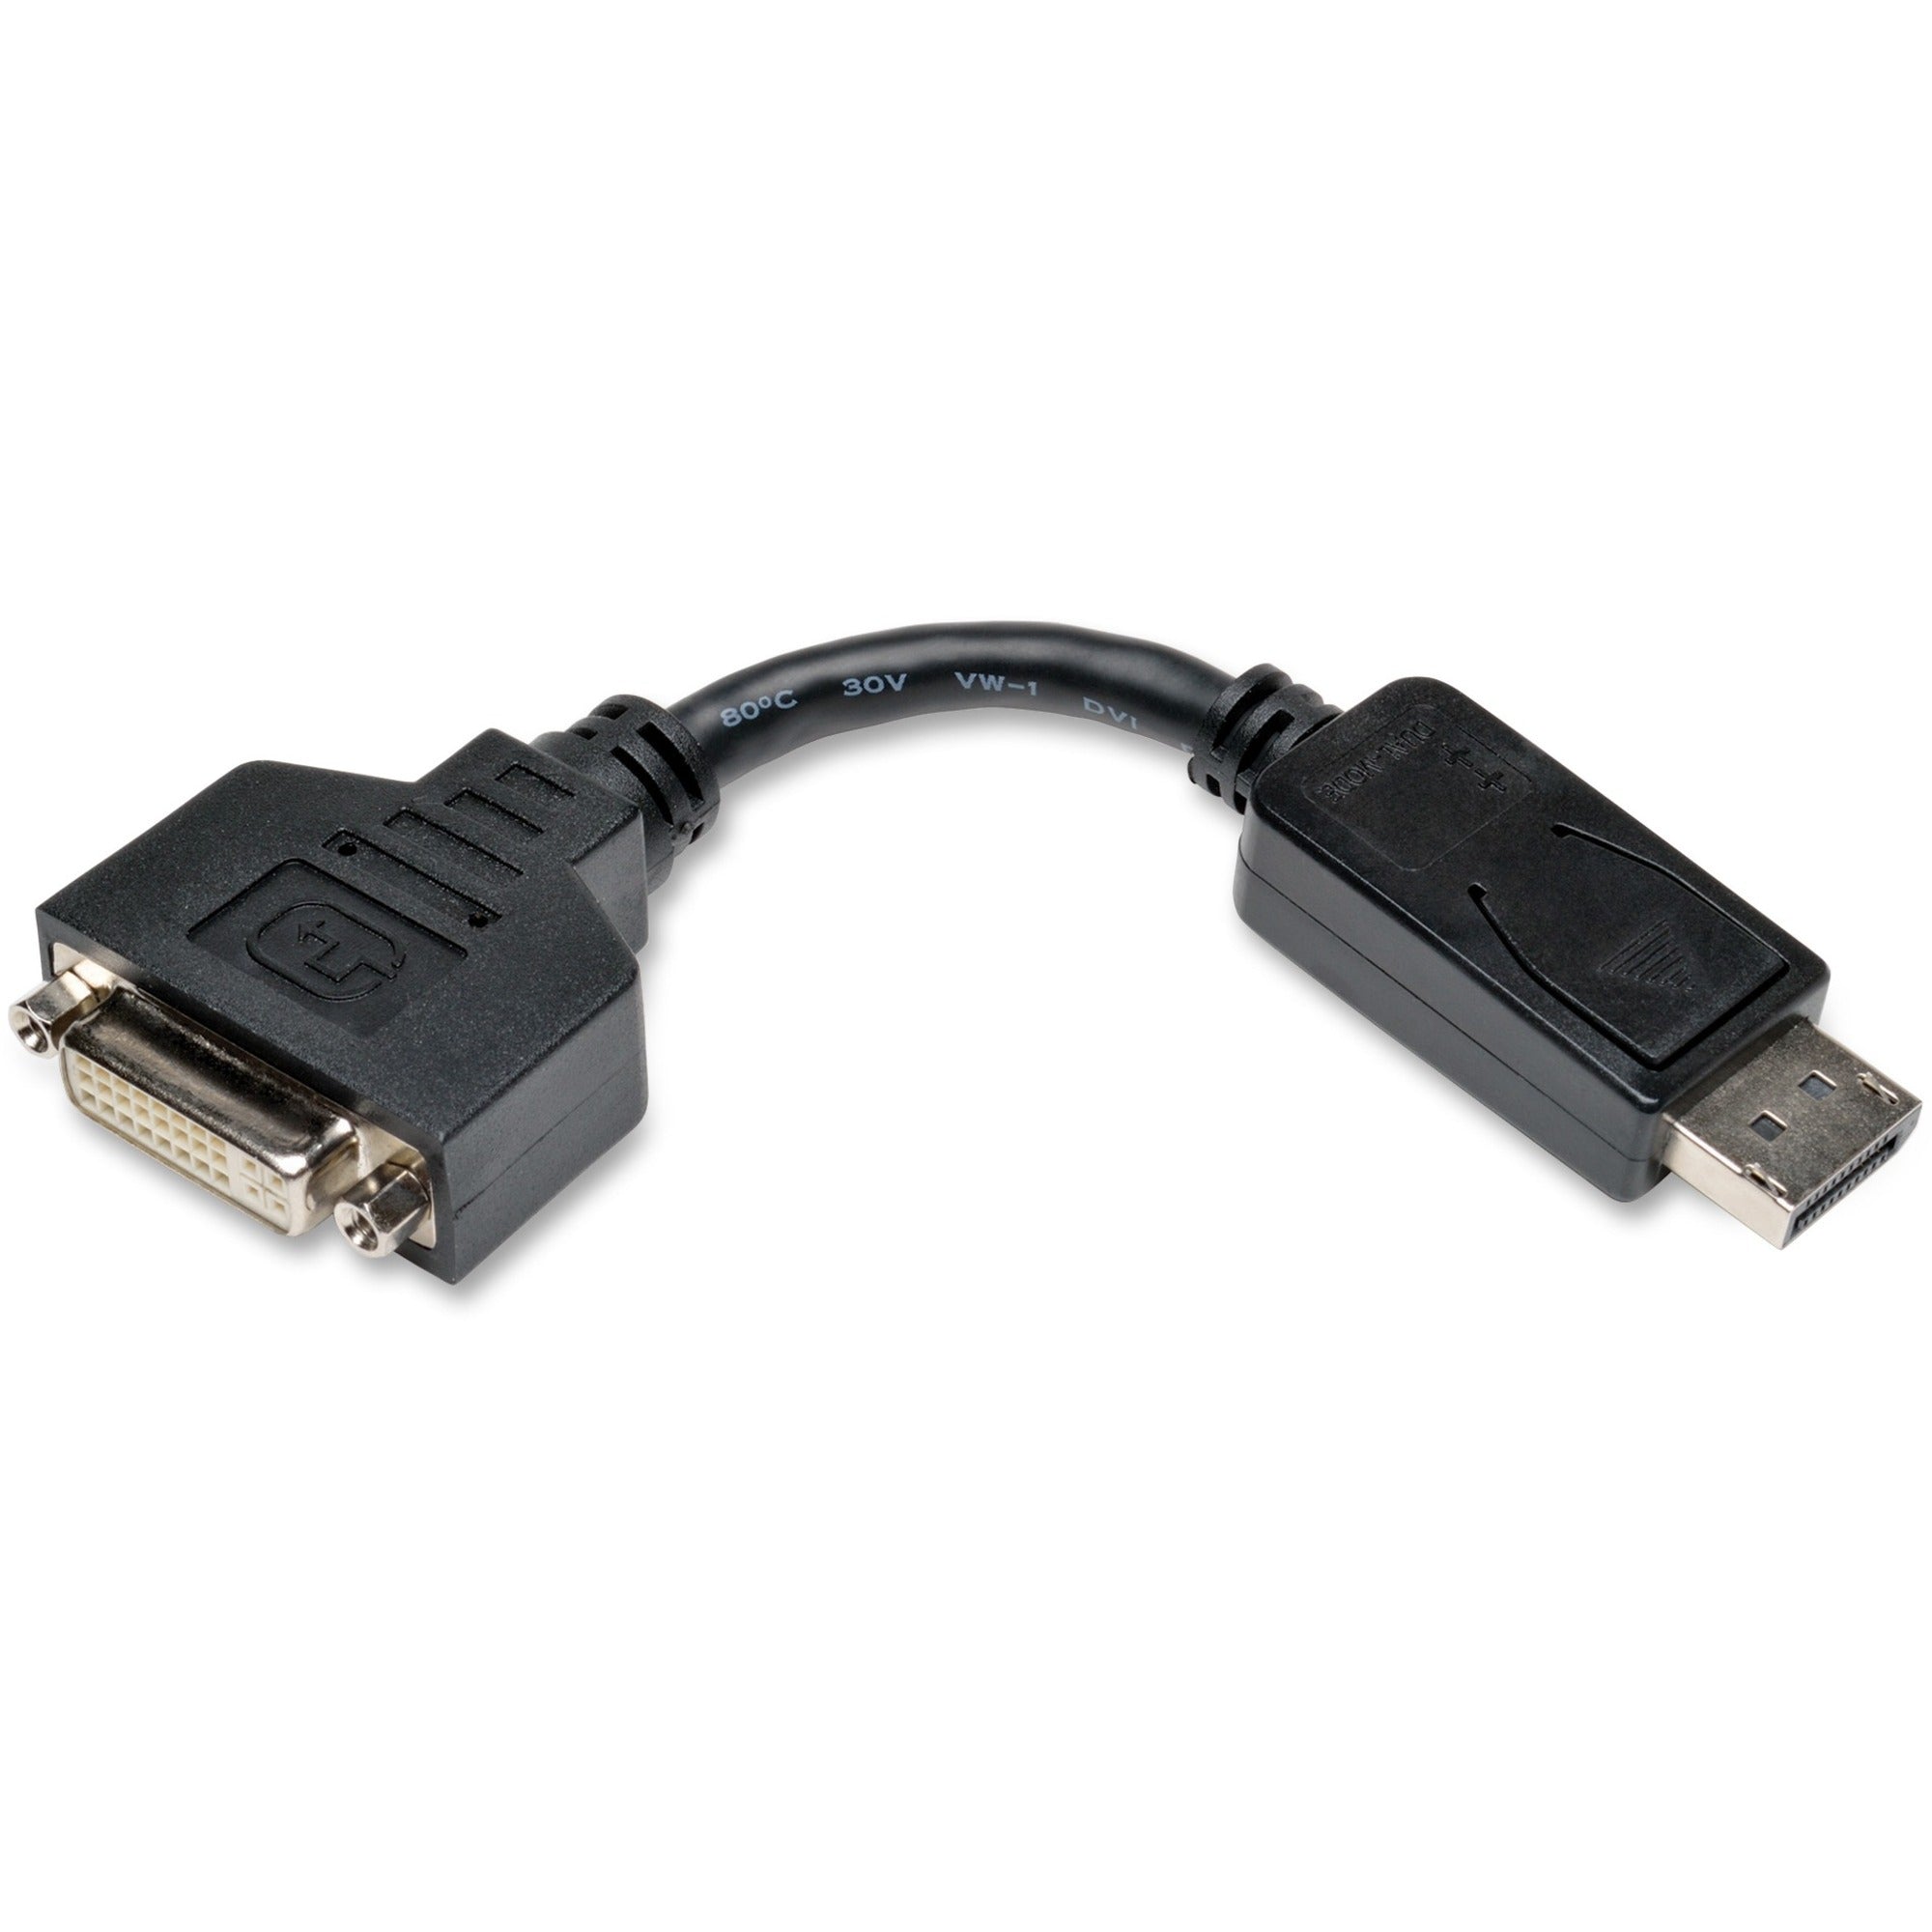 tripp-lite-by-eaton-displayport-to-dvi-adapter-video-converter-dp-m-to-dvi-i-f-6in-dp-to-dvi-for-dp-m-to-dvi-i-f_trpp134000 - 1